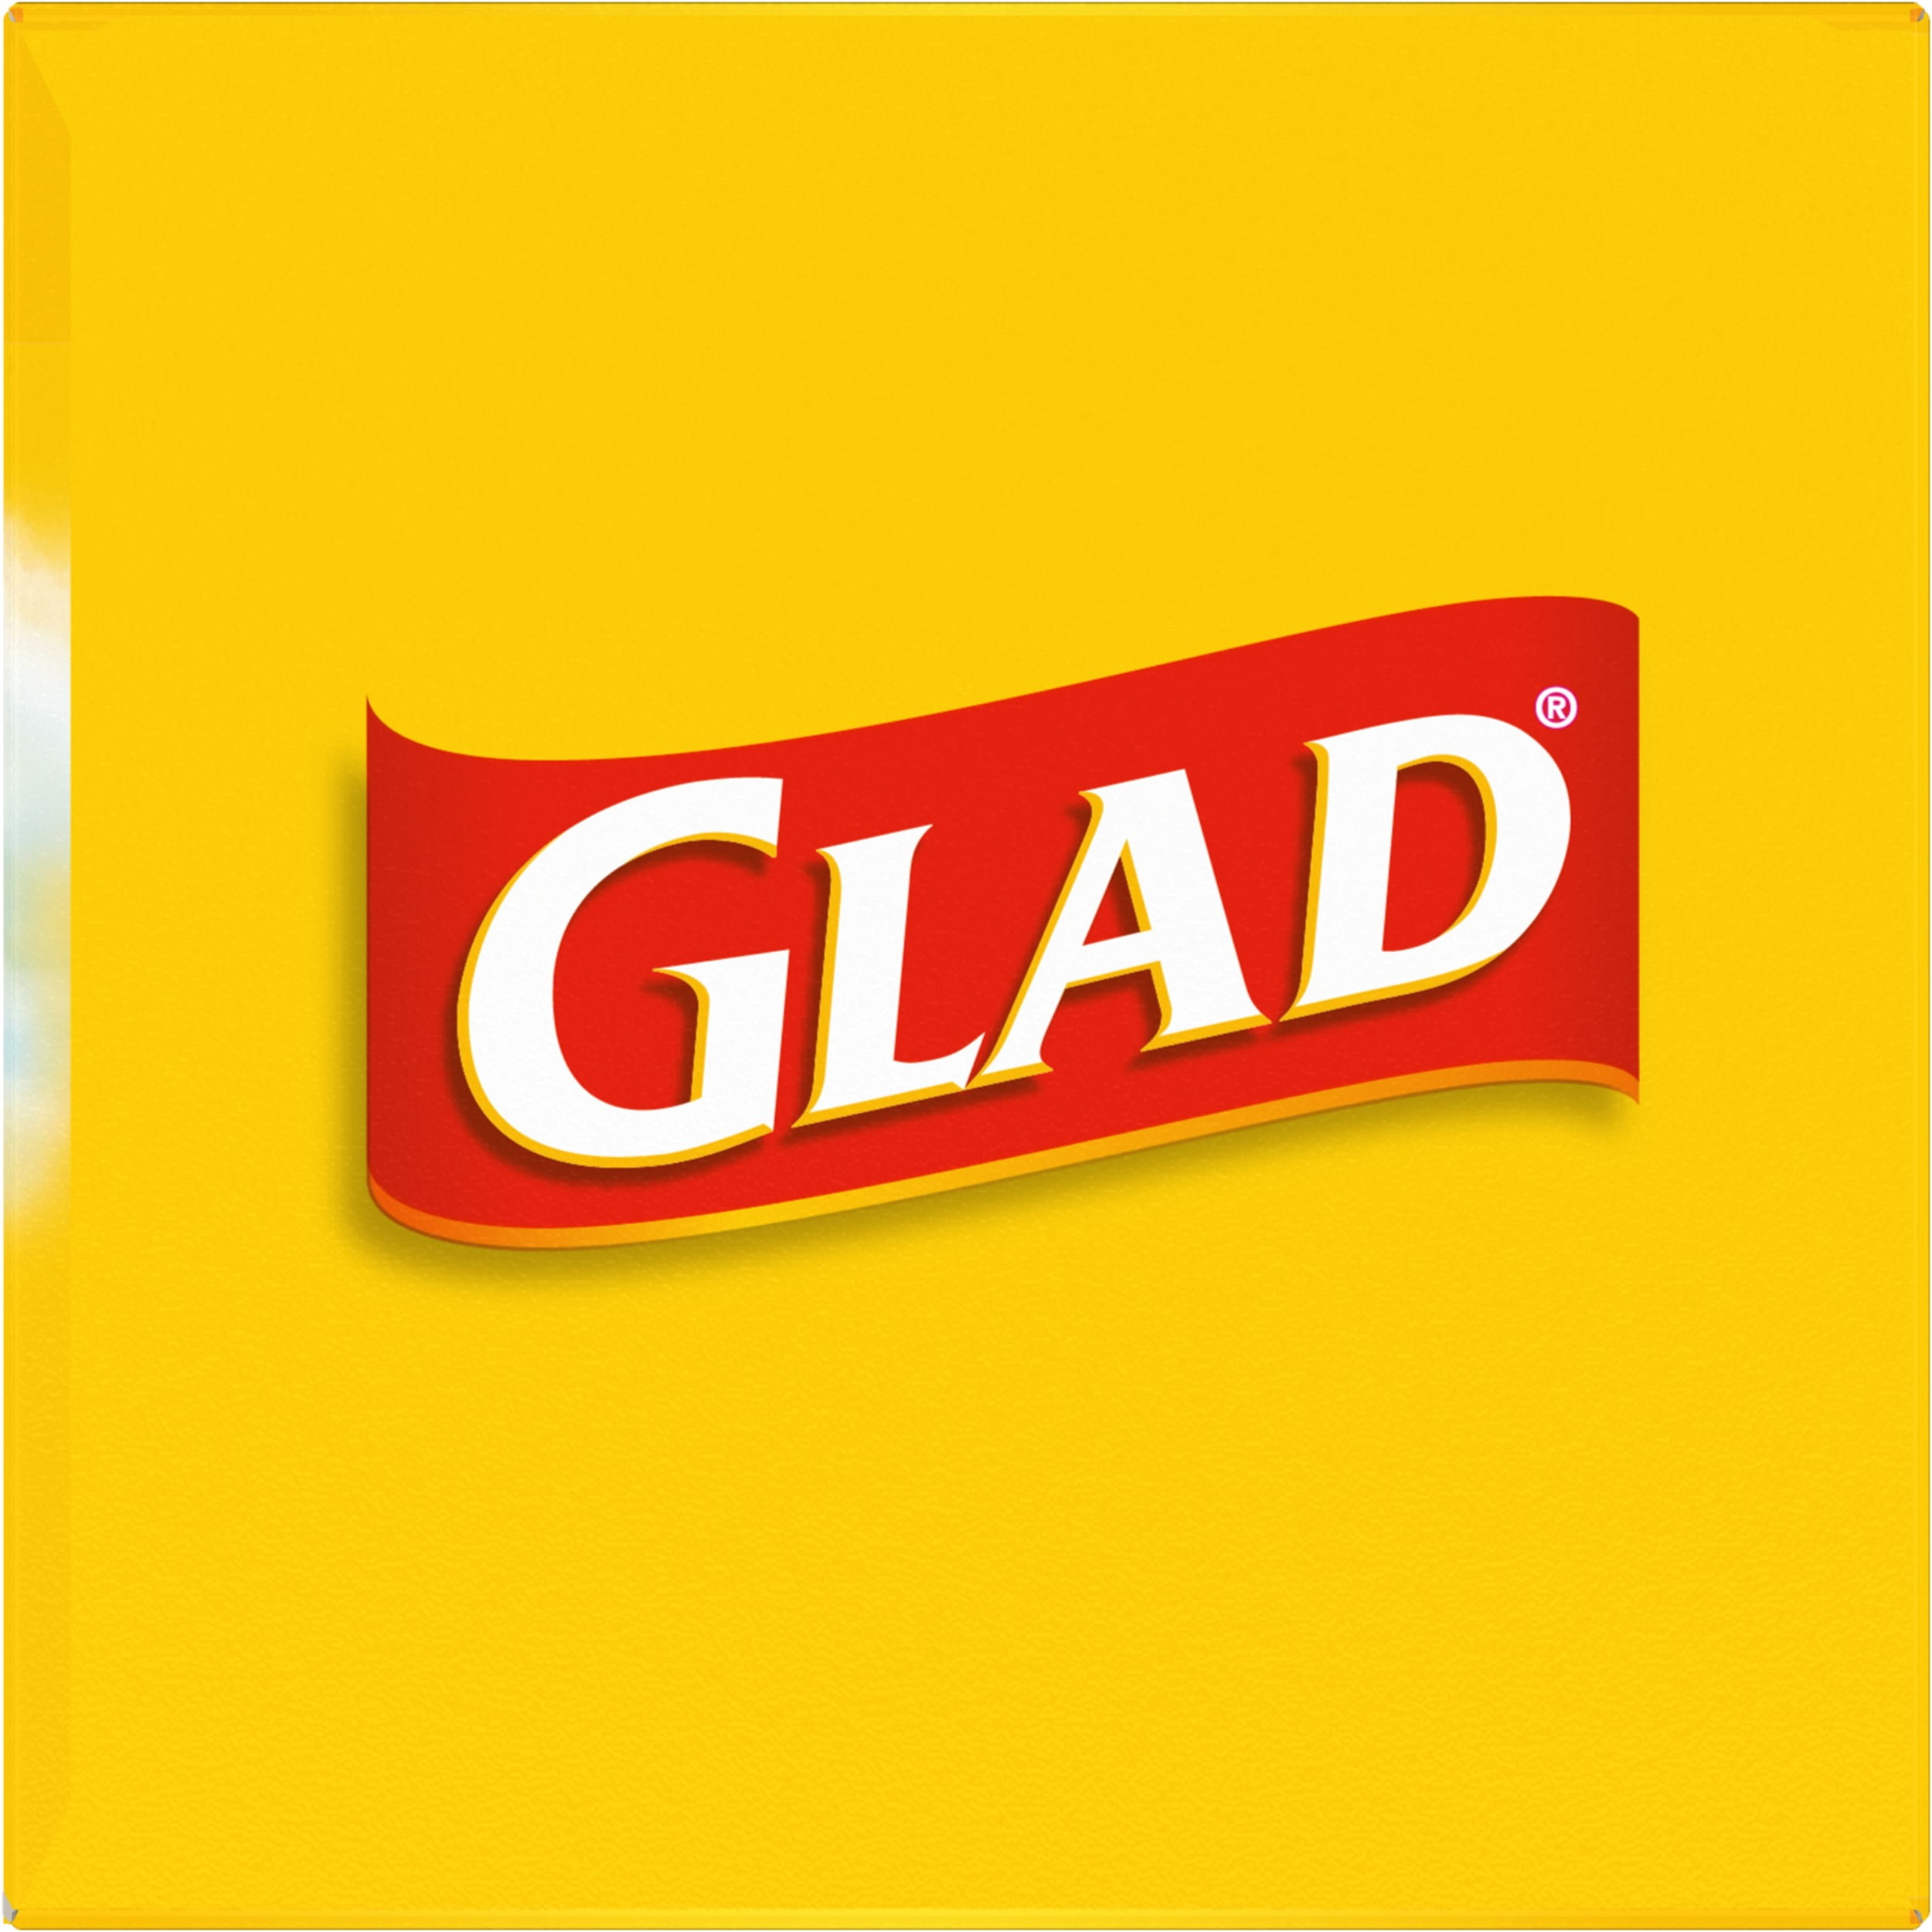 Glad Small Twist-Tie White Trash Bags, Fresh Clean Scent with